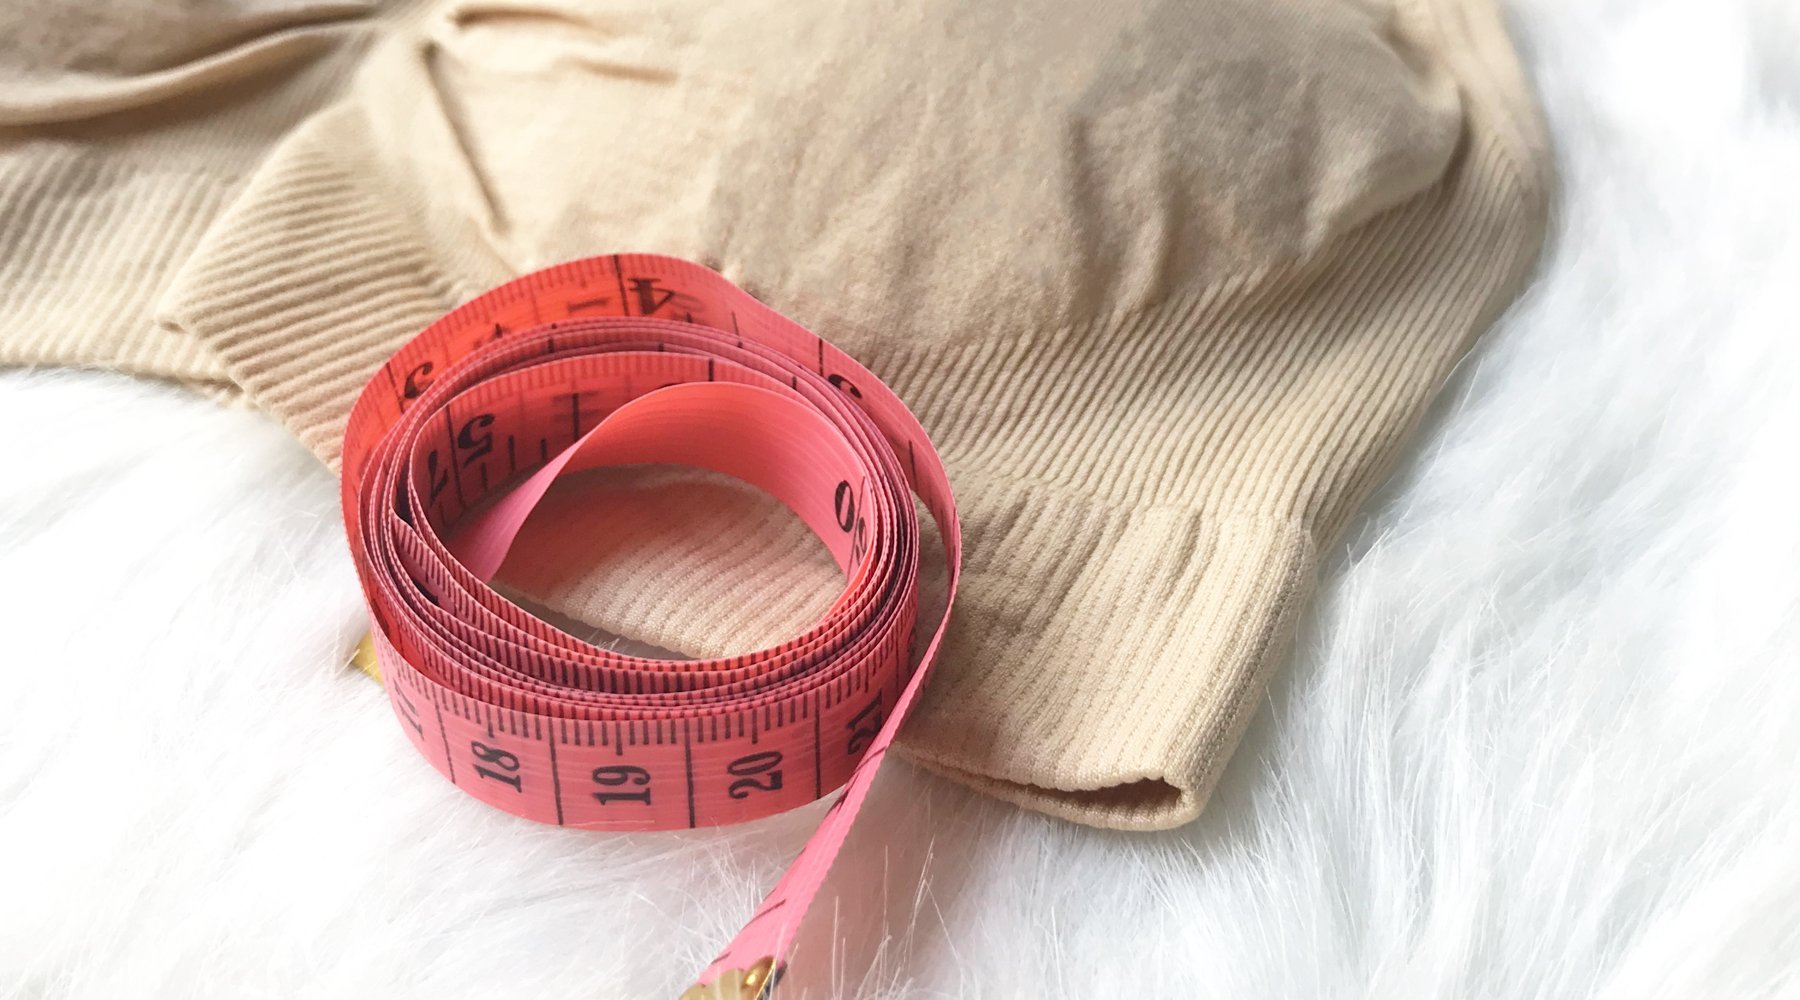 Meesa - Sister sizes are sizes that have the same cup capacity but a  different band size. Find out yours here! 😉🙃 . . . . . . . . #bra  #sistersizebra #onlineshopping #womenforwomen #meesa #meesa_np